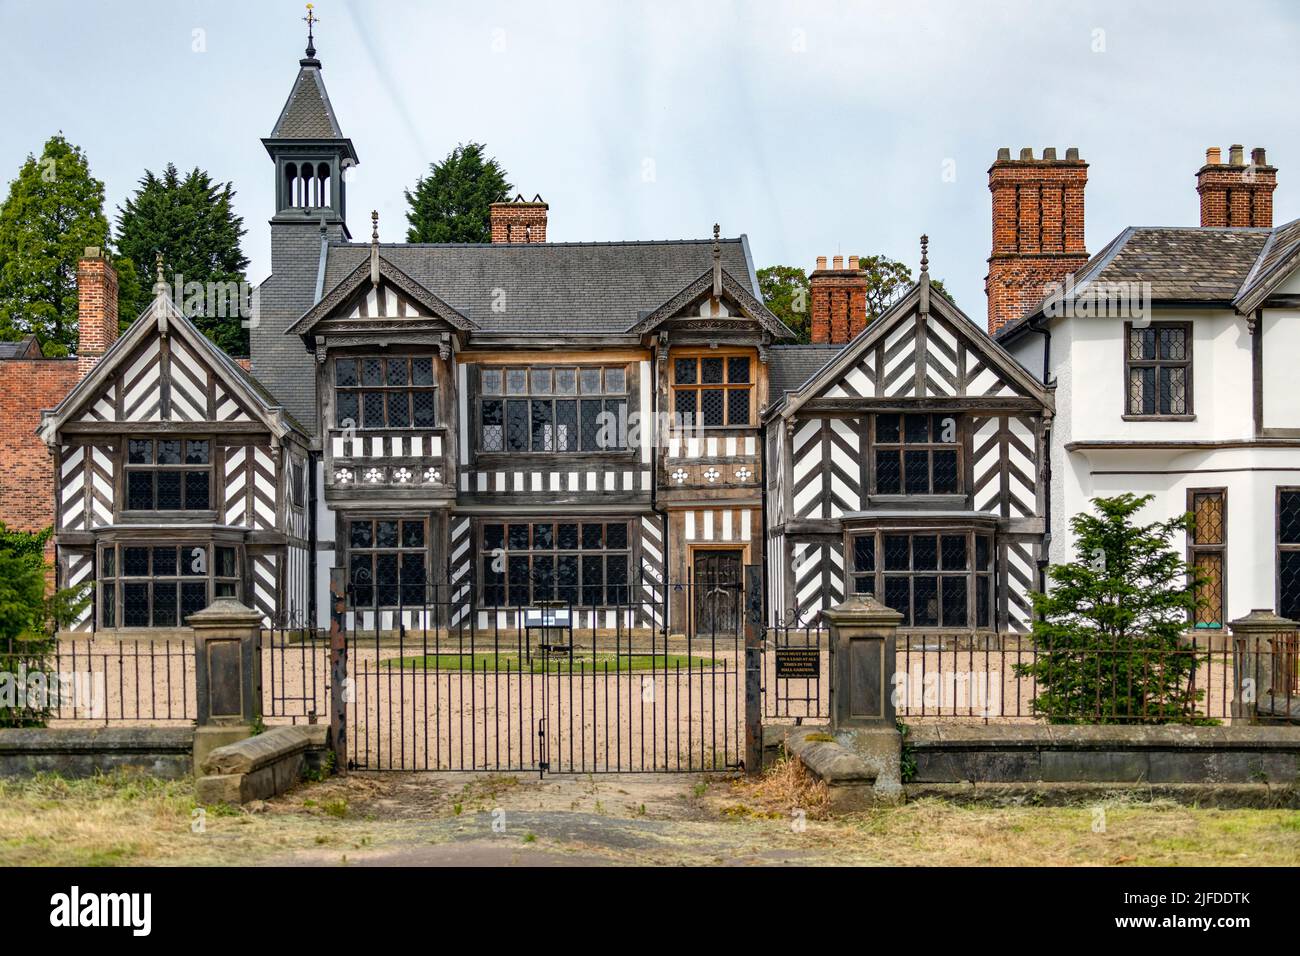 Wythenshawe Hall - a 16th-century timber-framed historic house and former manor house in Wythenshawe, Manchester in the United Kingdom., Stock Photo